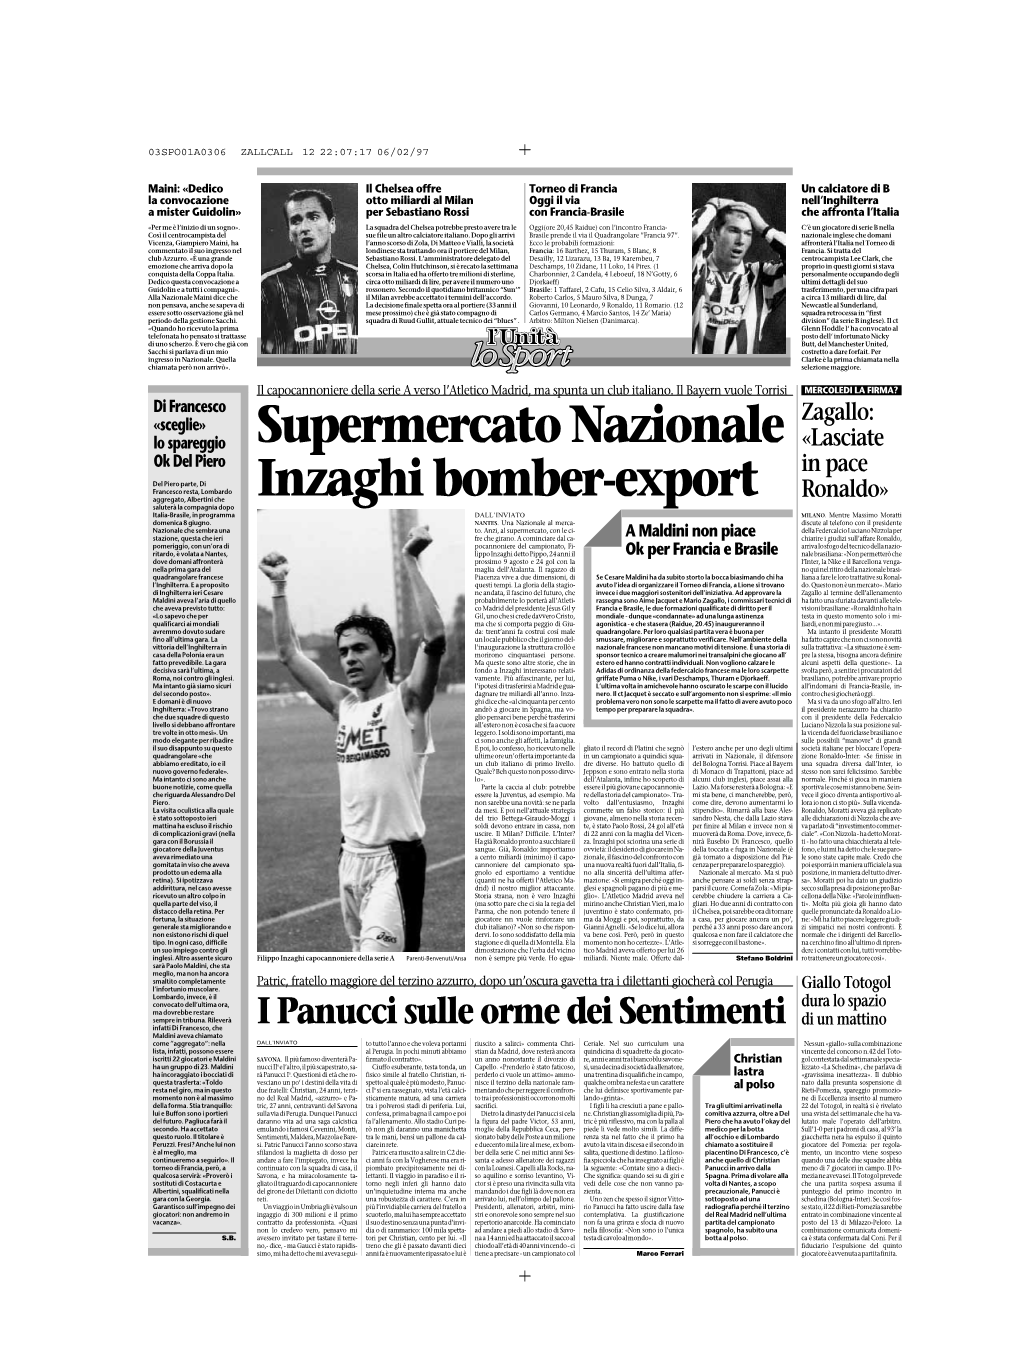 Supermercato Nazionale Inzaghi Bomber-Export